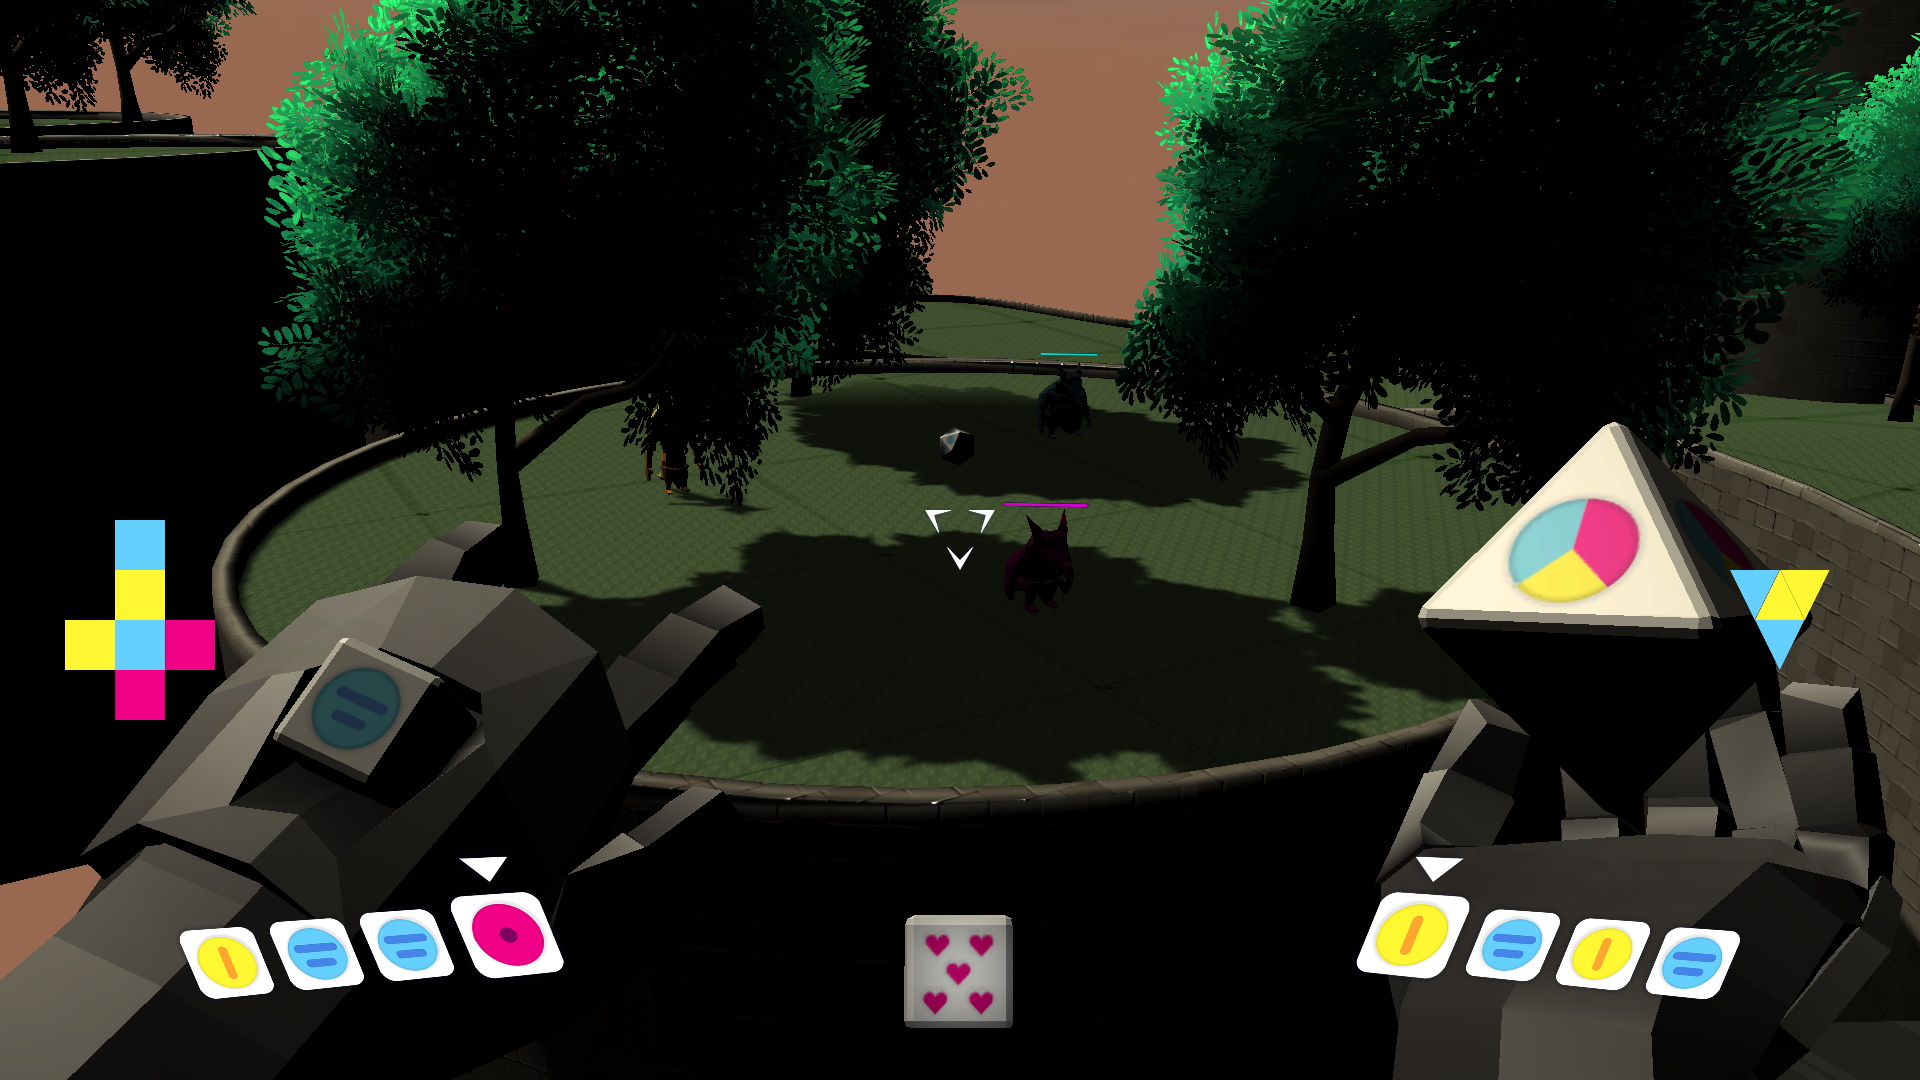 A screenshot from a 3D first-person shooter game. The player is looking down at some green terrain with threes on it. On the terrain are some enemies, each with a different colour and health bar of a matching colour. At the bottom of the screen, a die with 5 hearts on it can be seen. In the bottom left of the image is a hand with a die embedded in it. Next to this hand are a net of a cube with even numbers of cyan, yellow, and magenta faces, and below this are four slots for ammo. One slot has a magenta circle, two have cyan circles, and one has a yellow circle. In the bottom right of the image is a second hand holding a floating octahedron with faces showing all three colours together. Next to this hand are a net of an octahedron with two cyan faces and two yellow faces, and below this are four more slots, two of which show yellow circles and two of which show cyan circles. In the centre of the image is a triangular reticule.